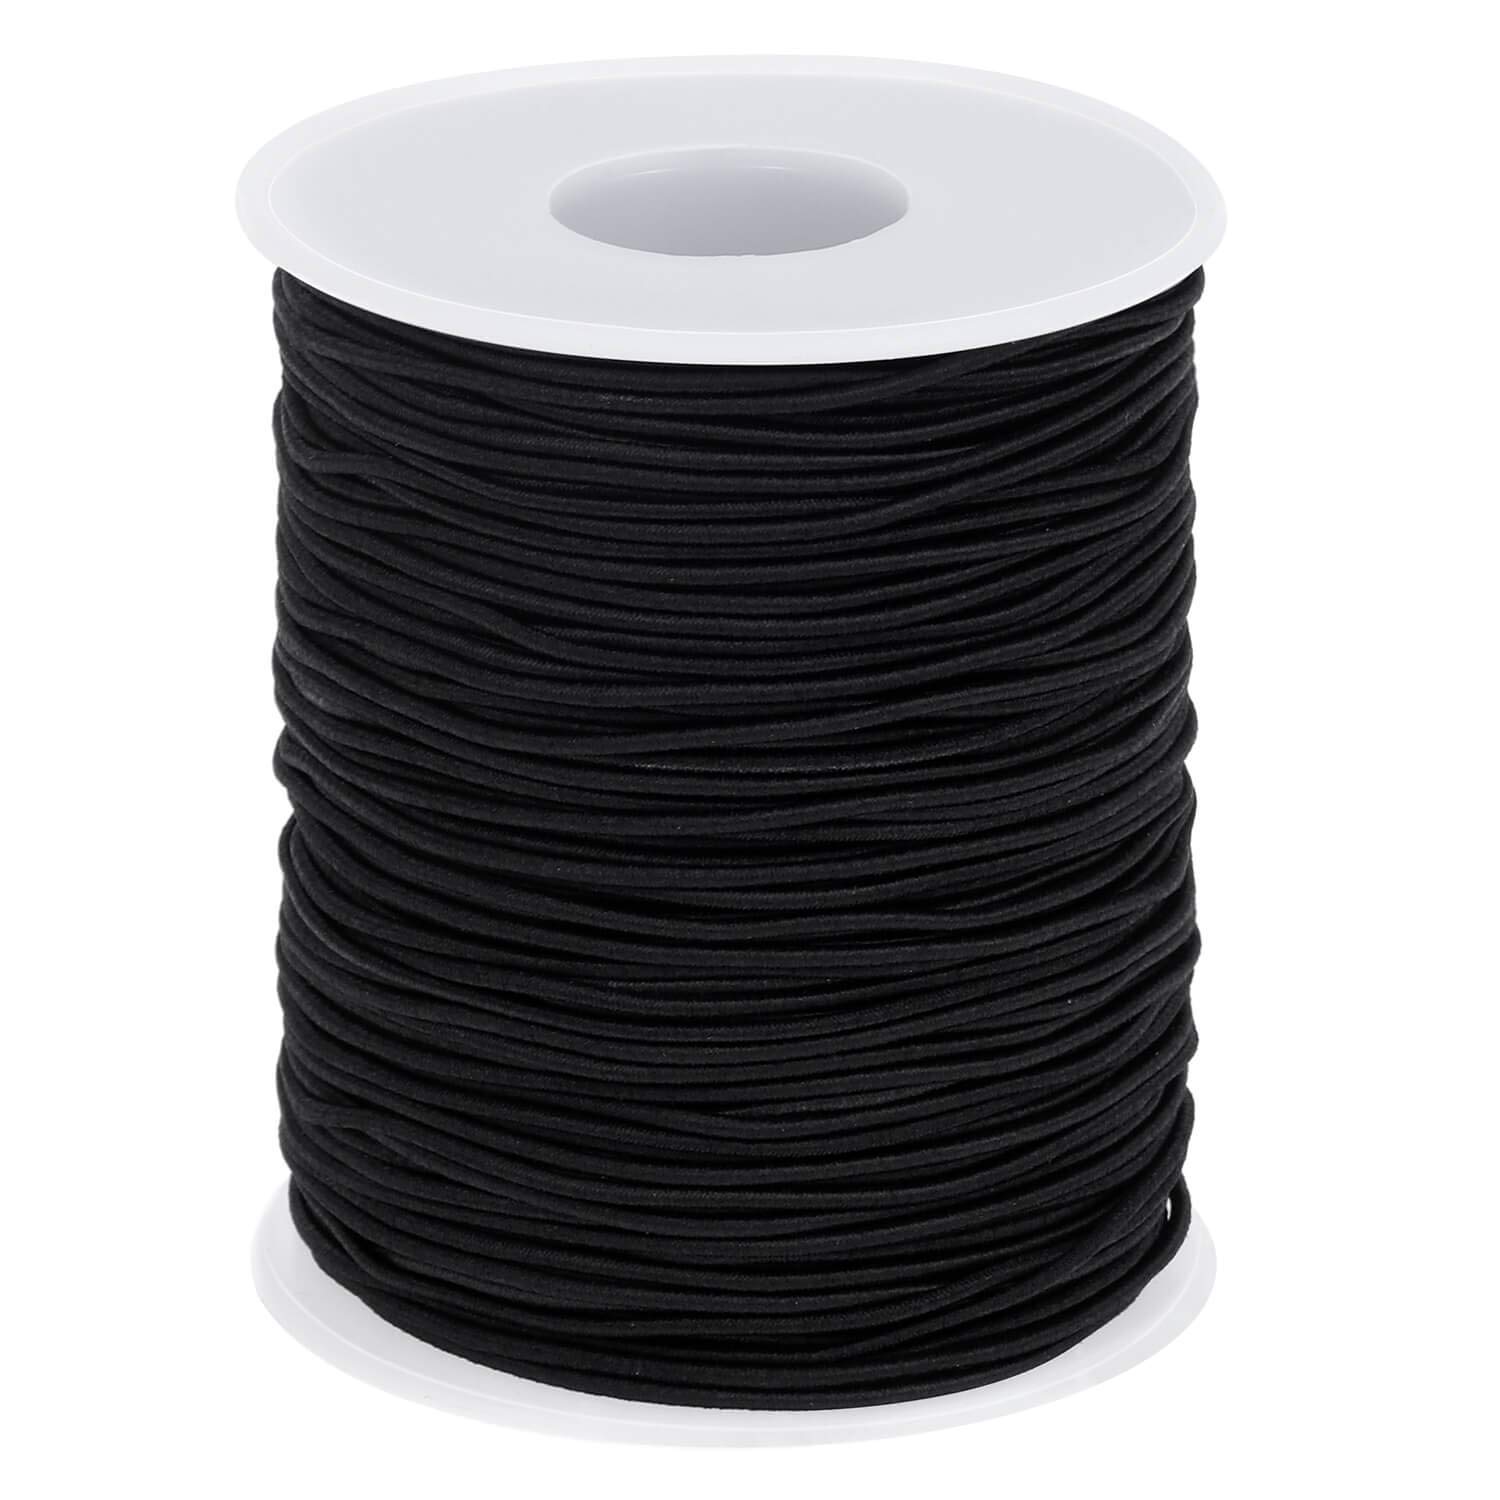 elastic wire for bracelets